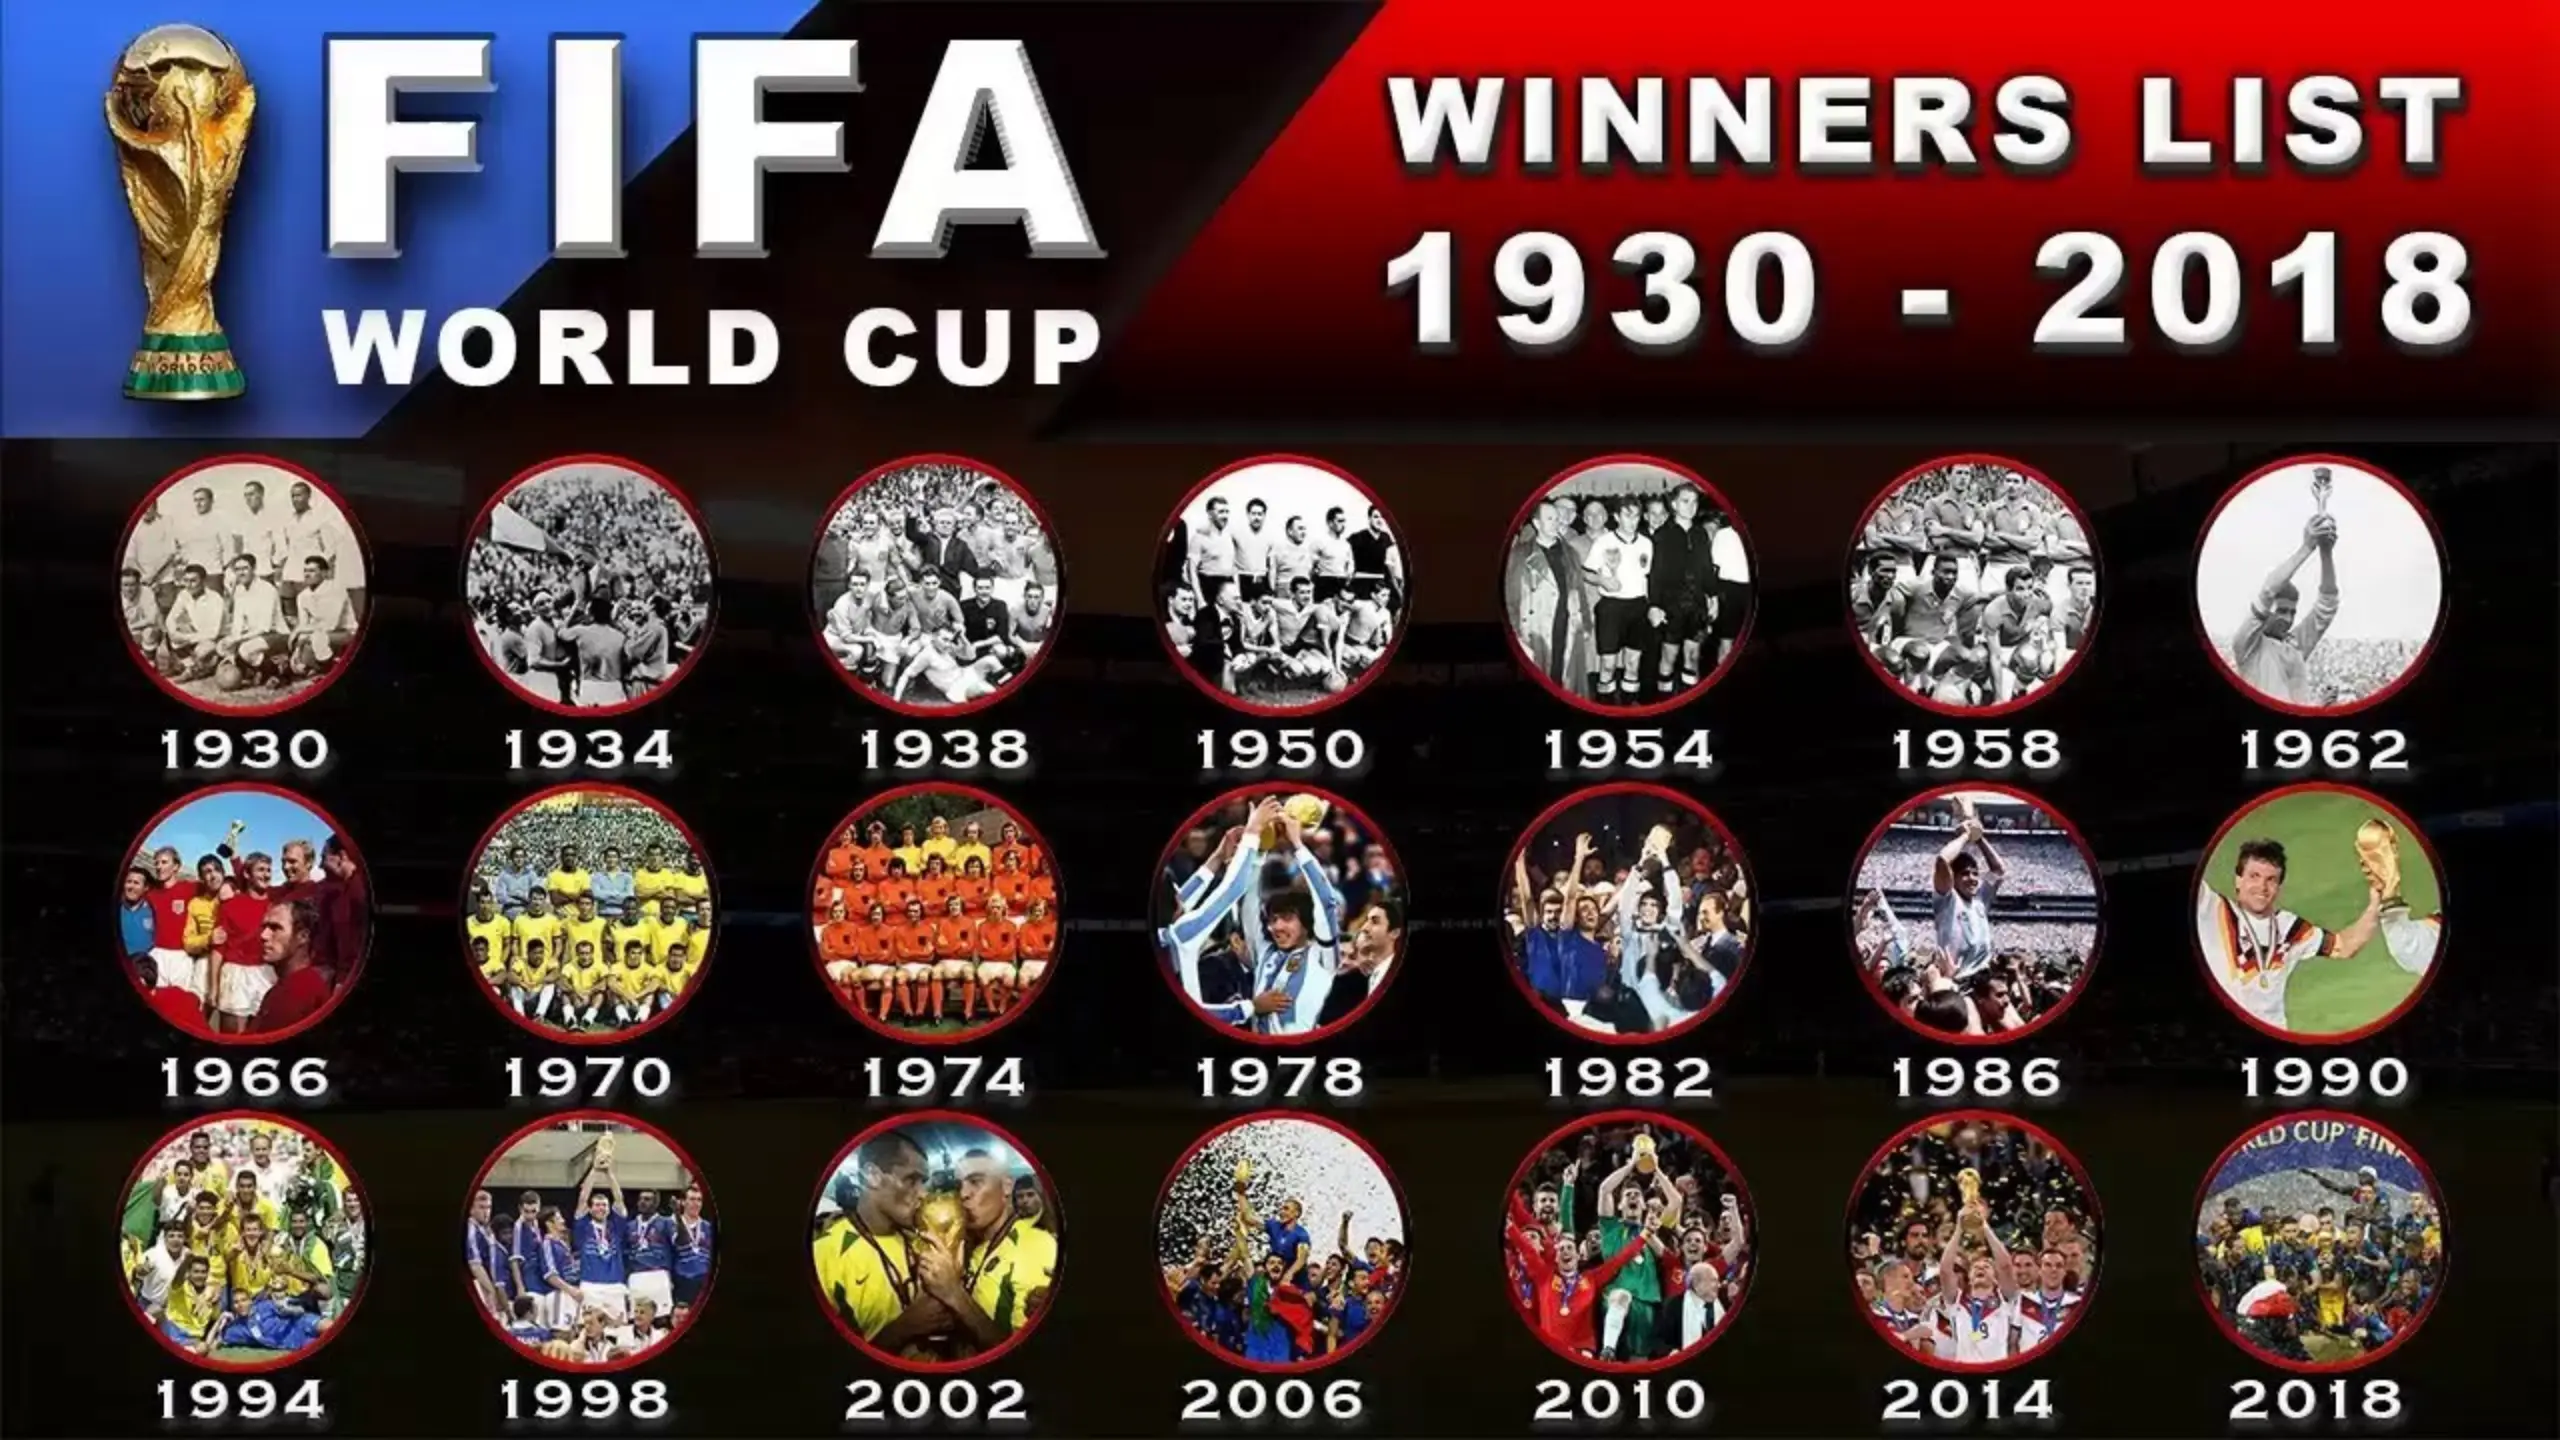 Who Won the World Cup from 1930 to 2018